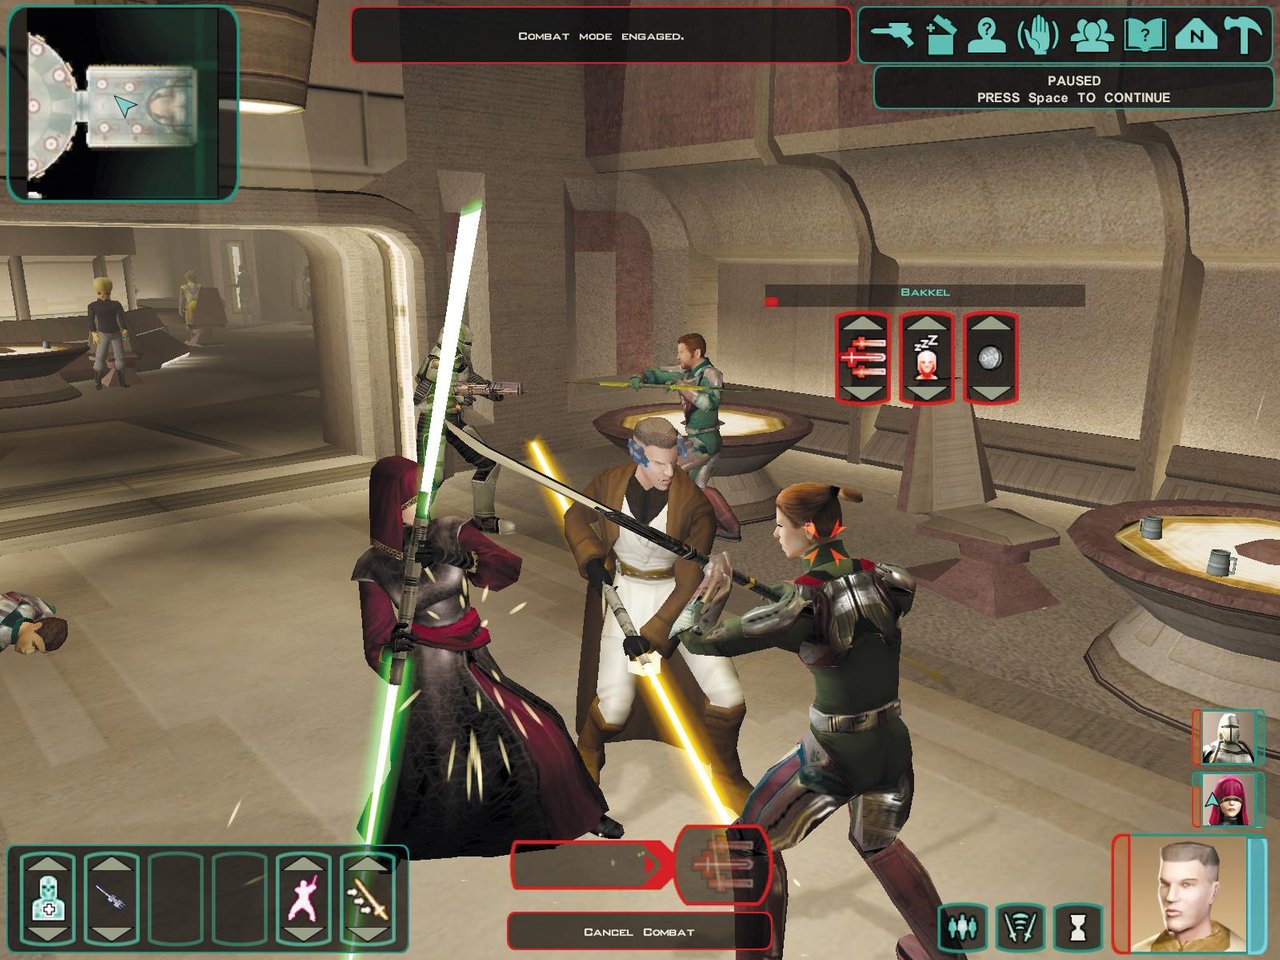 Star wars knight of the old republic 2 русификатор steam фото 90